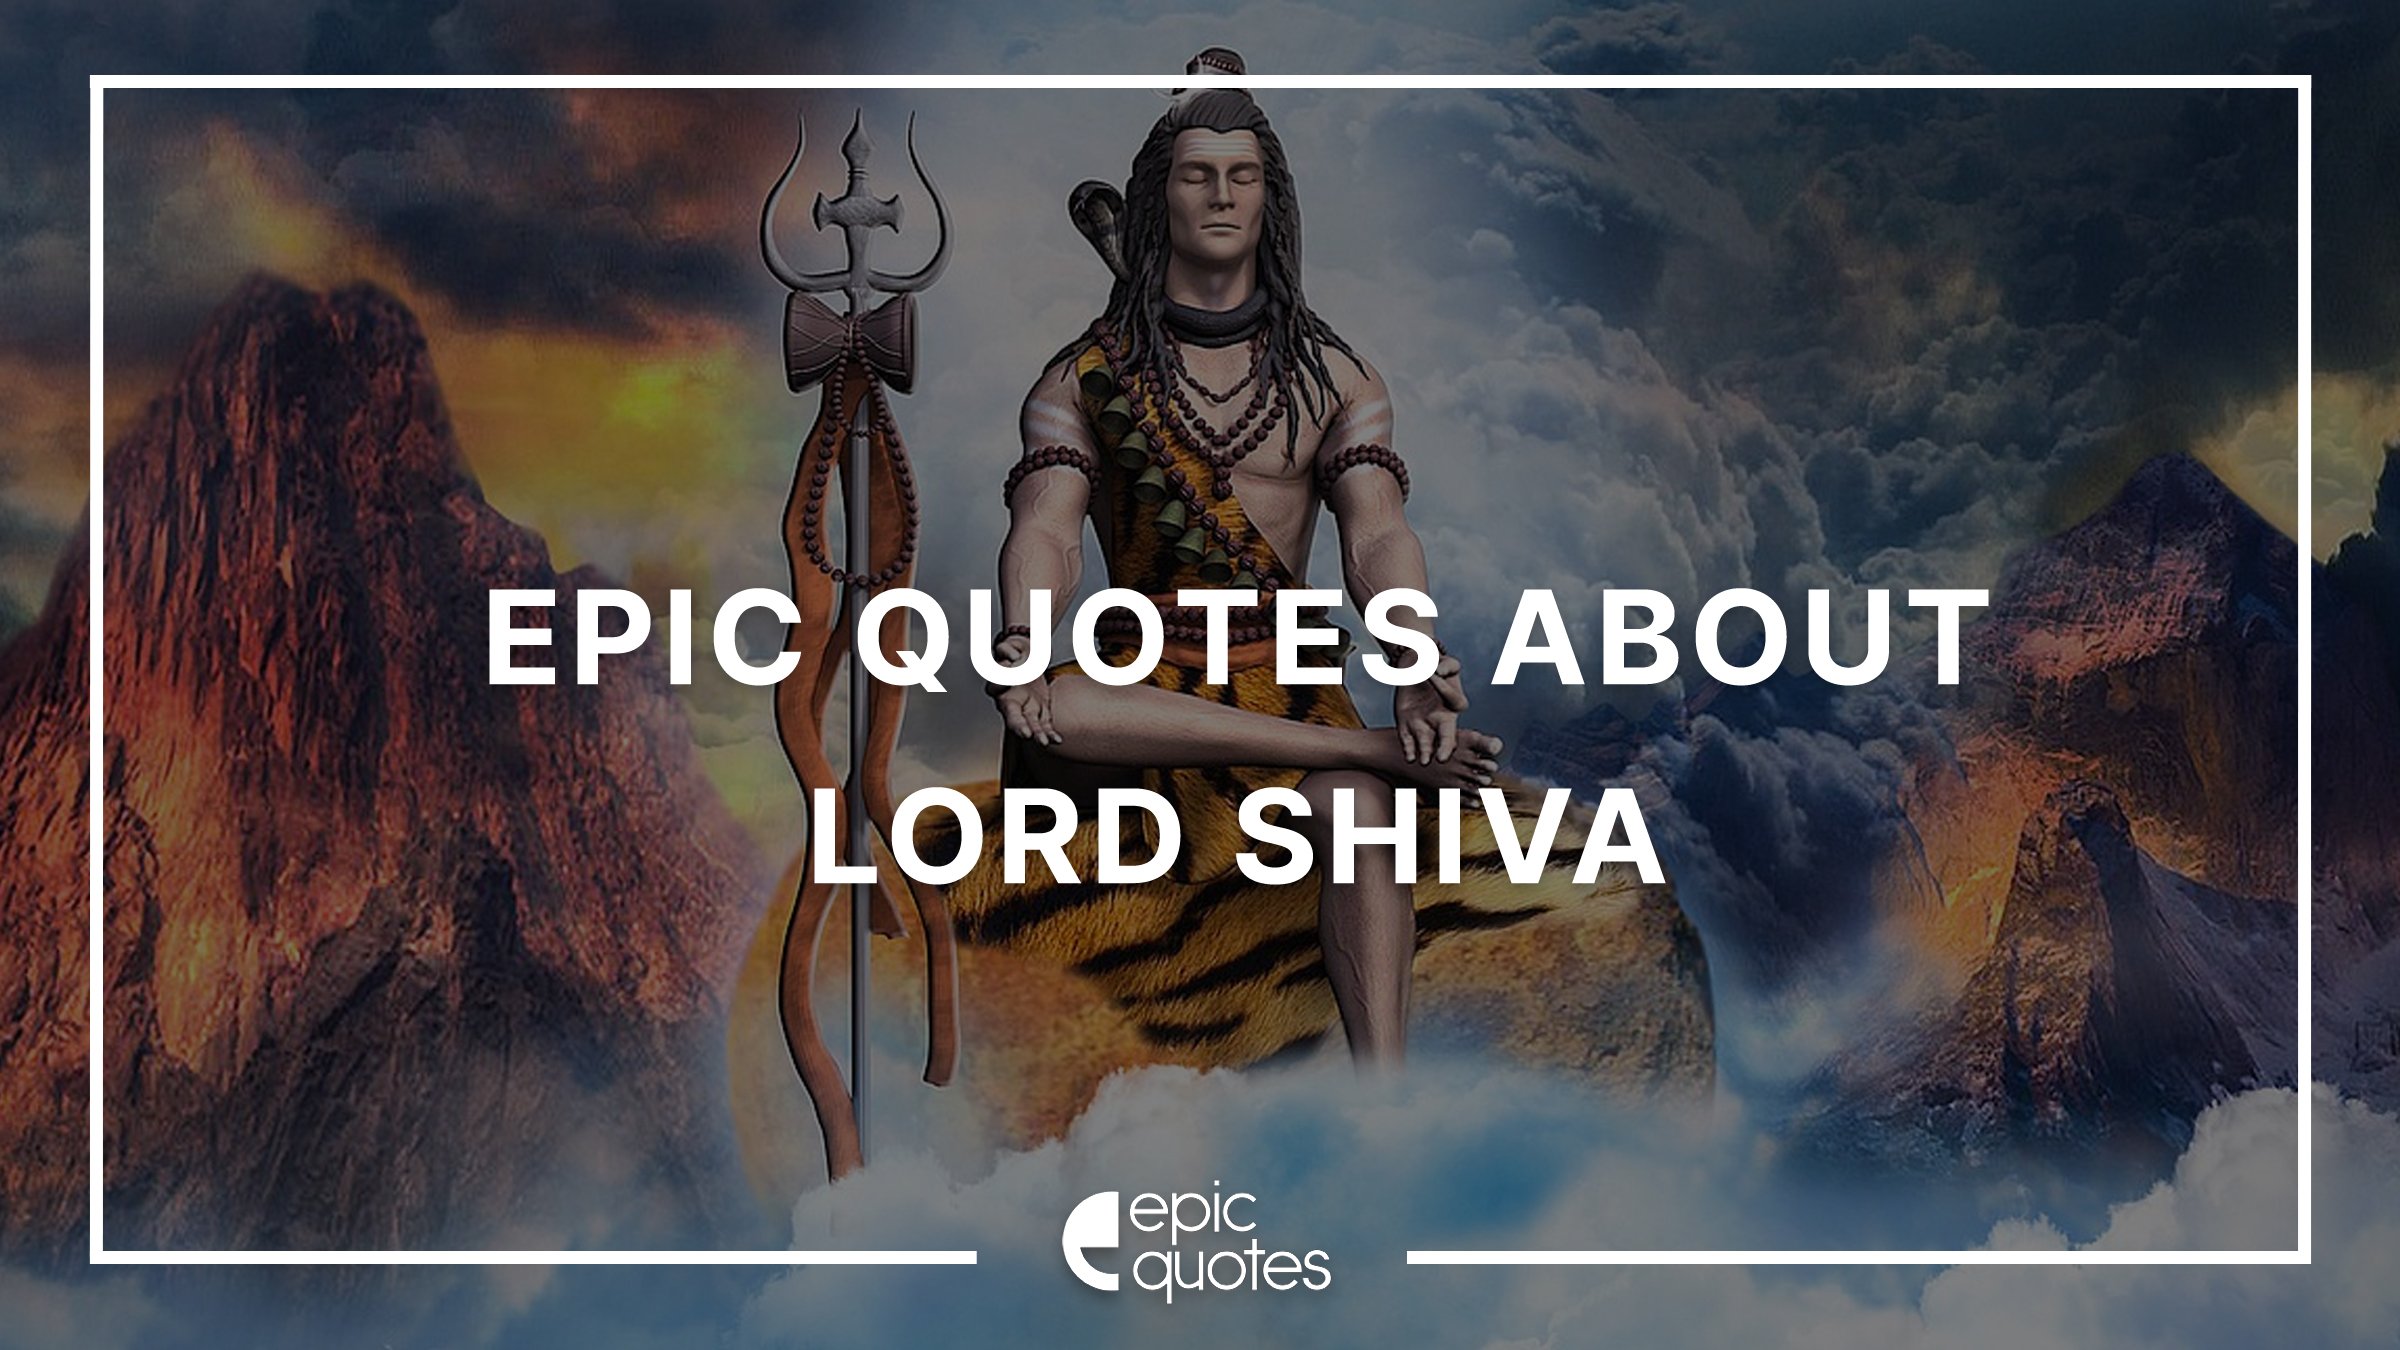 A Lord Shiva quote